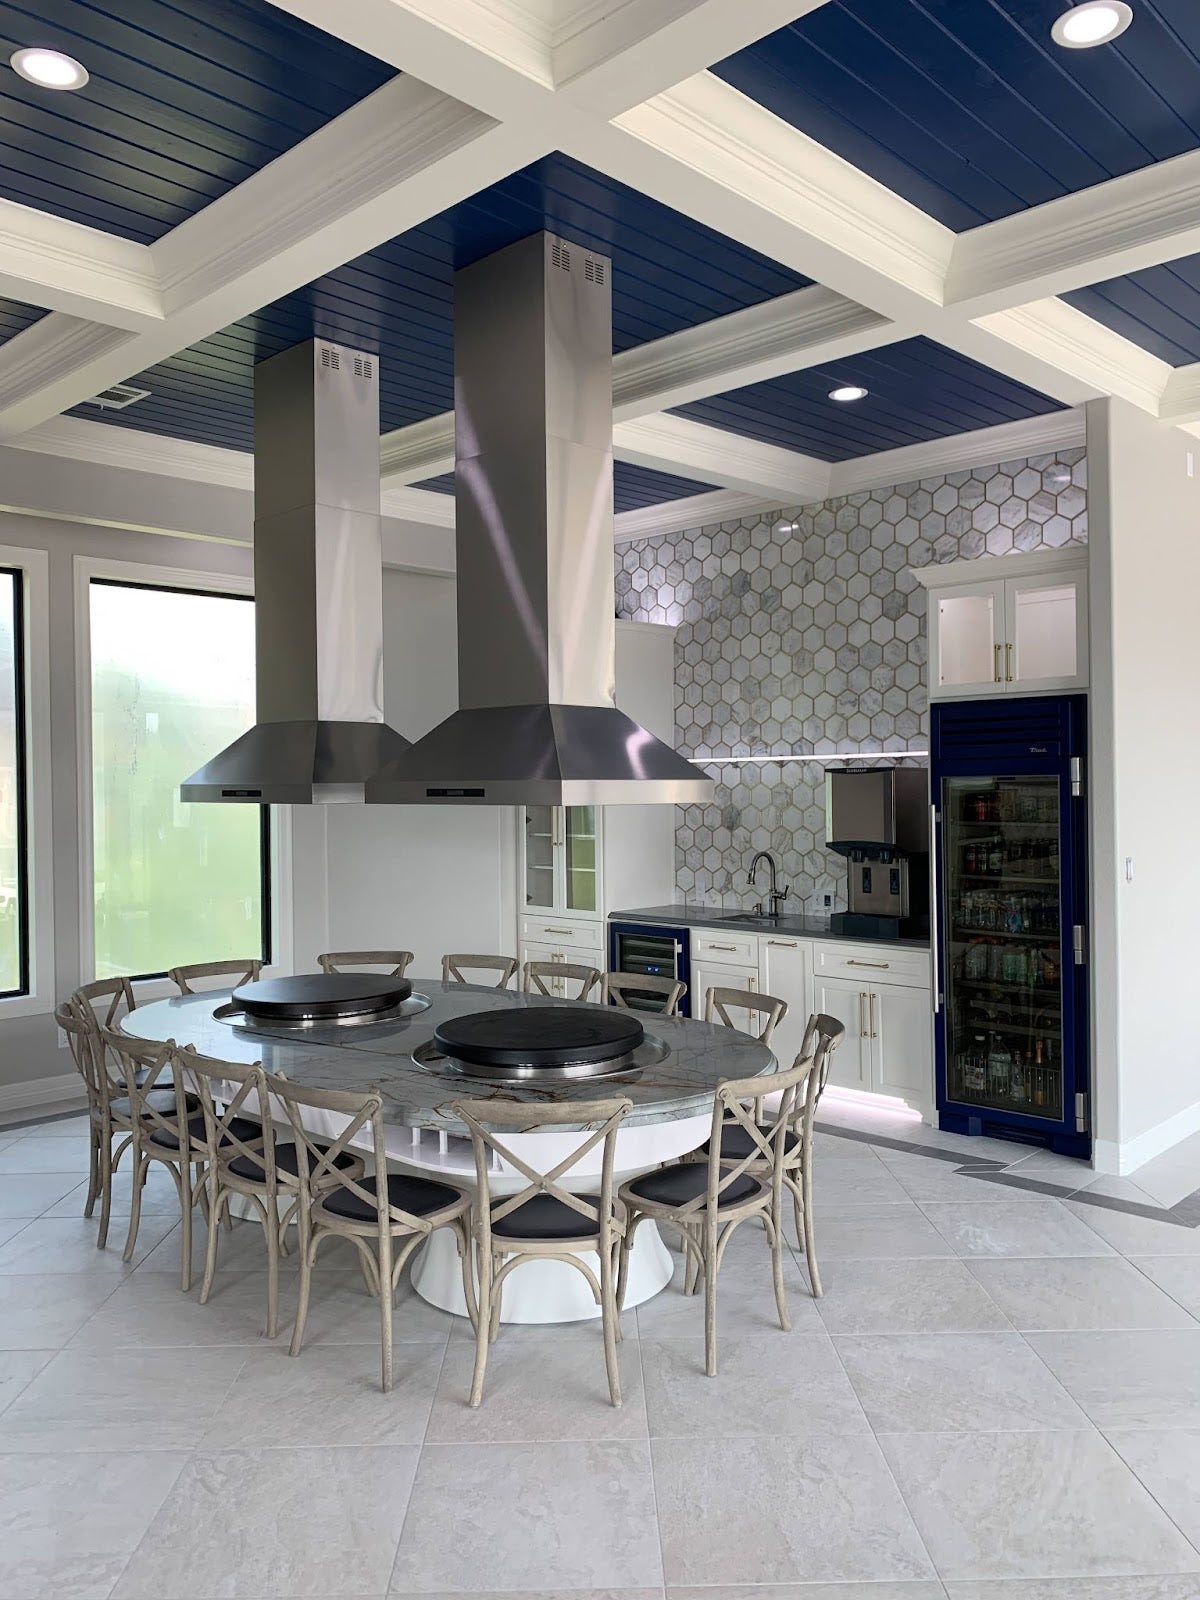 Spacious outdoor kitchen with a two large Proline range hood, equipped with modern appliances in blue and white -prolinerangehoods.com.